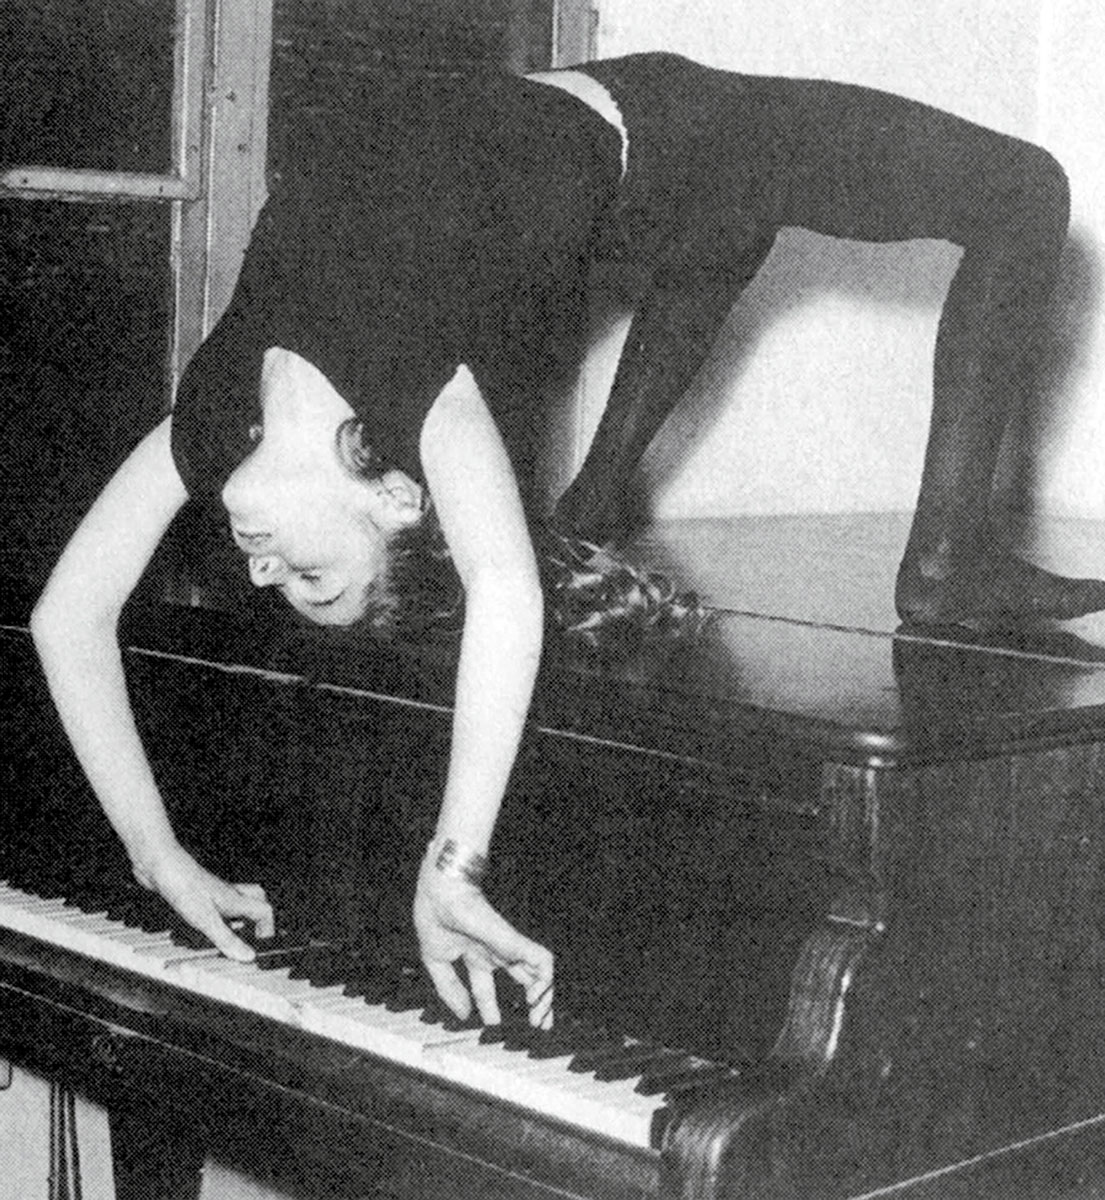 Drouet performing acrobatics while playing a sonata by Mozart, ca. 1960.